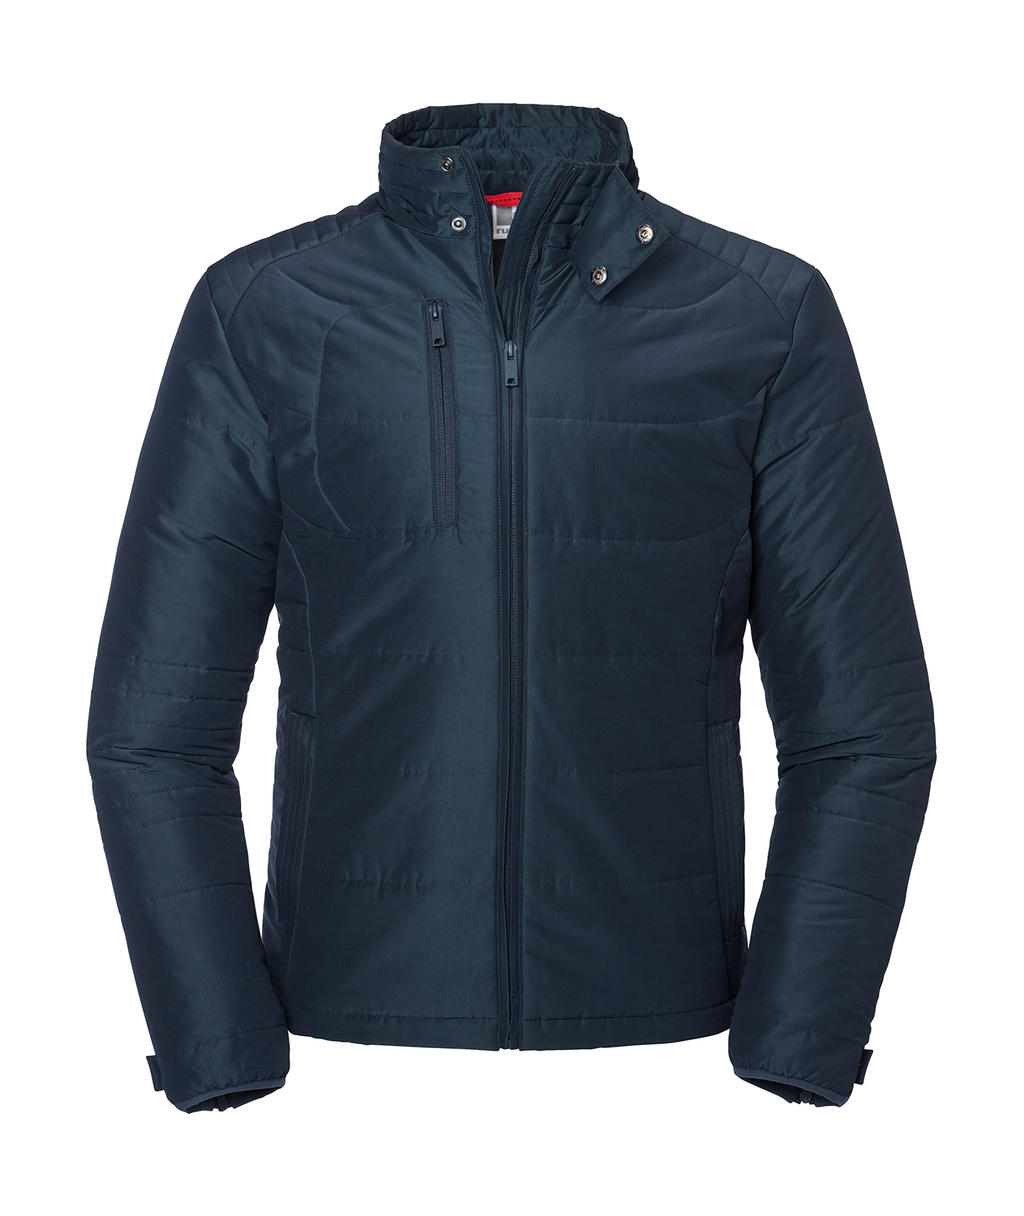  Mens Cross Jacket in Farbe French Navy